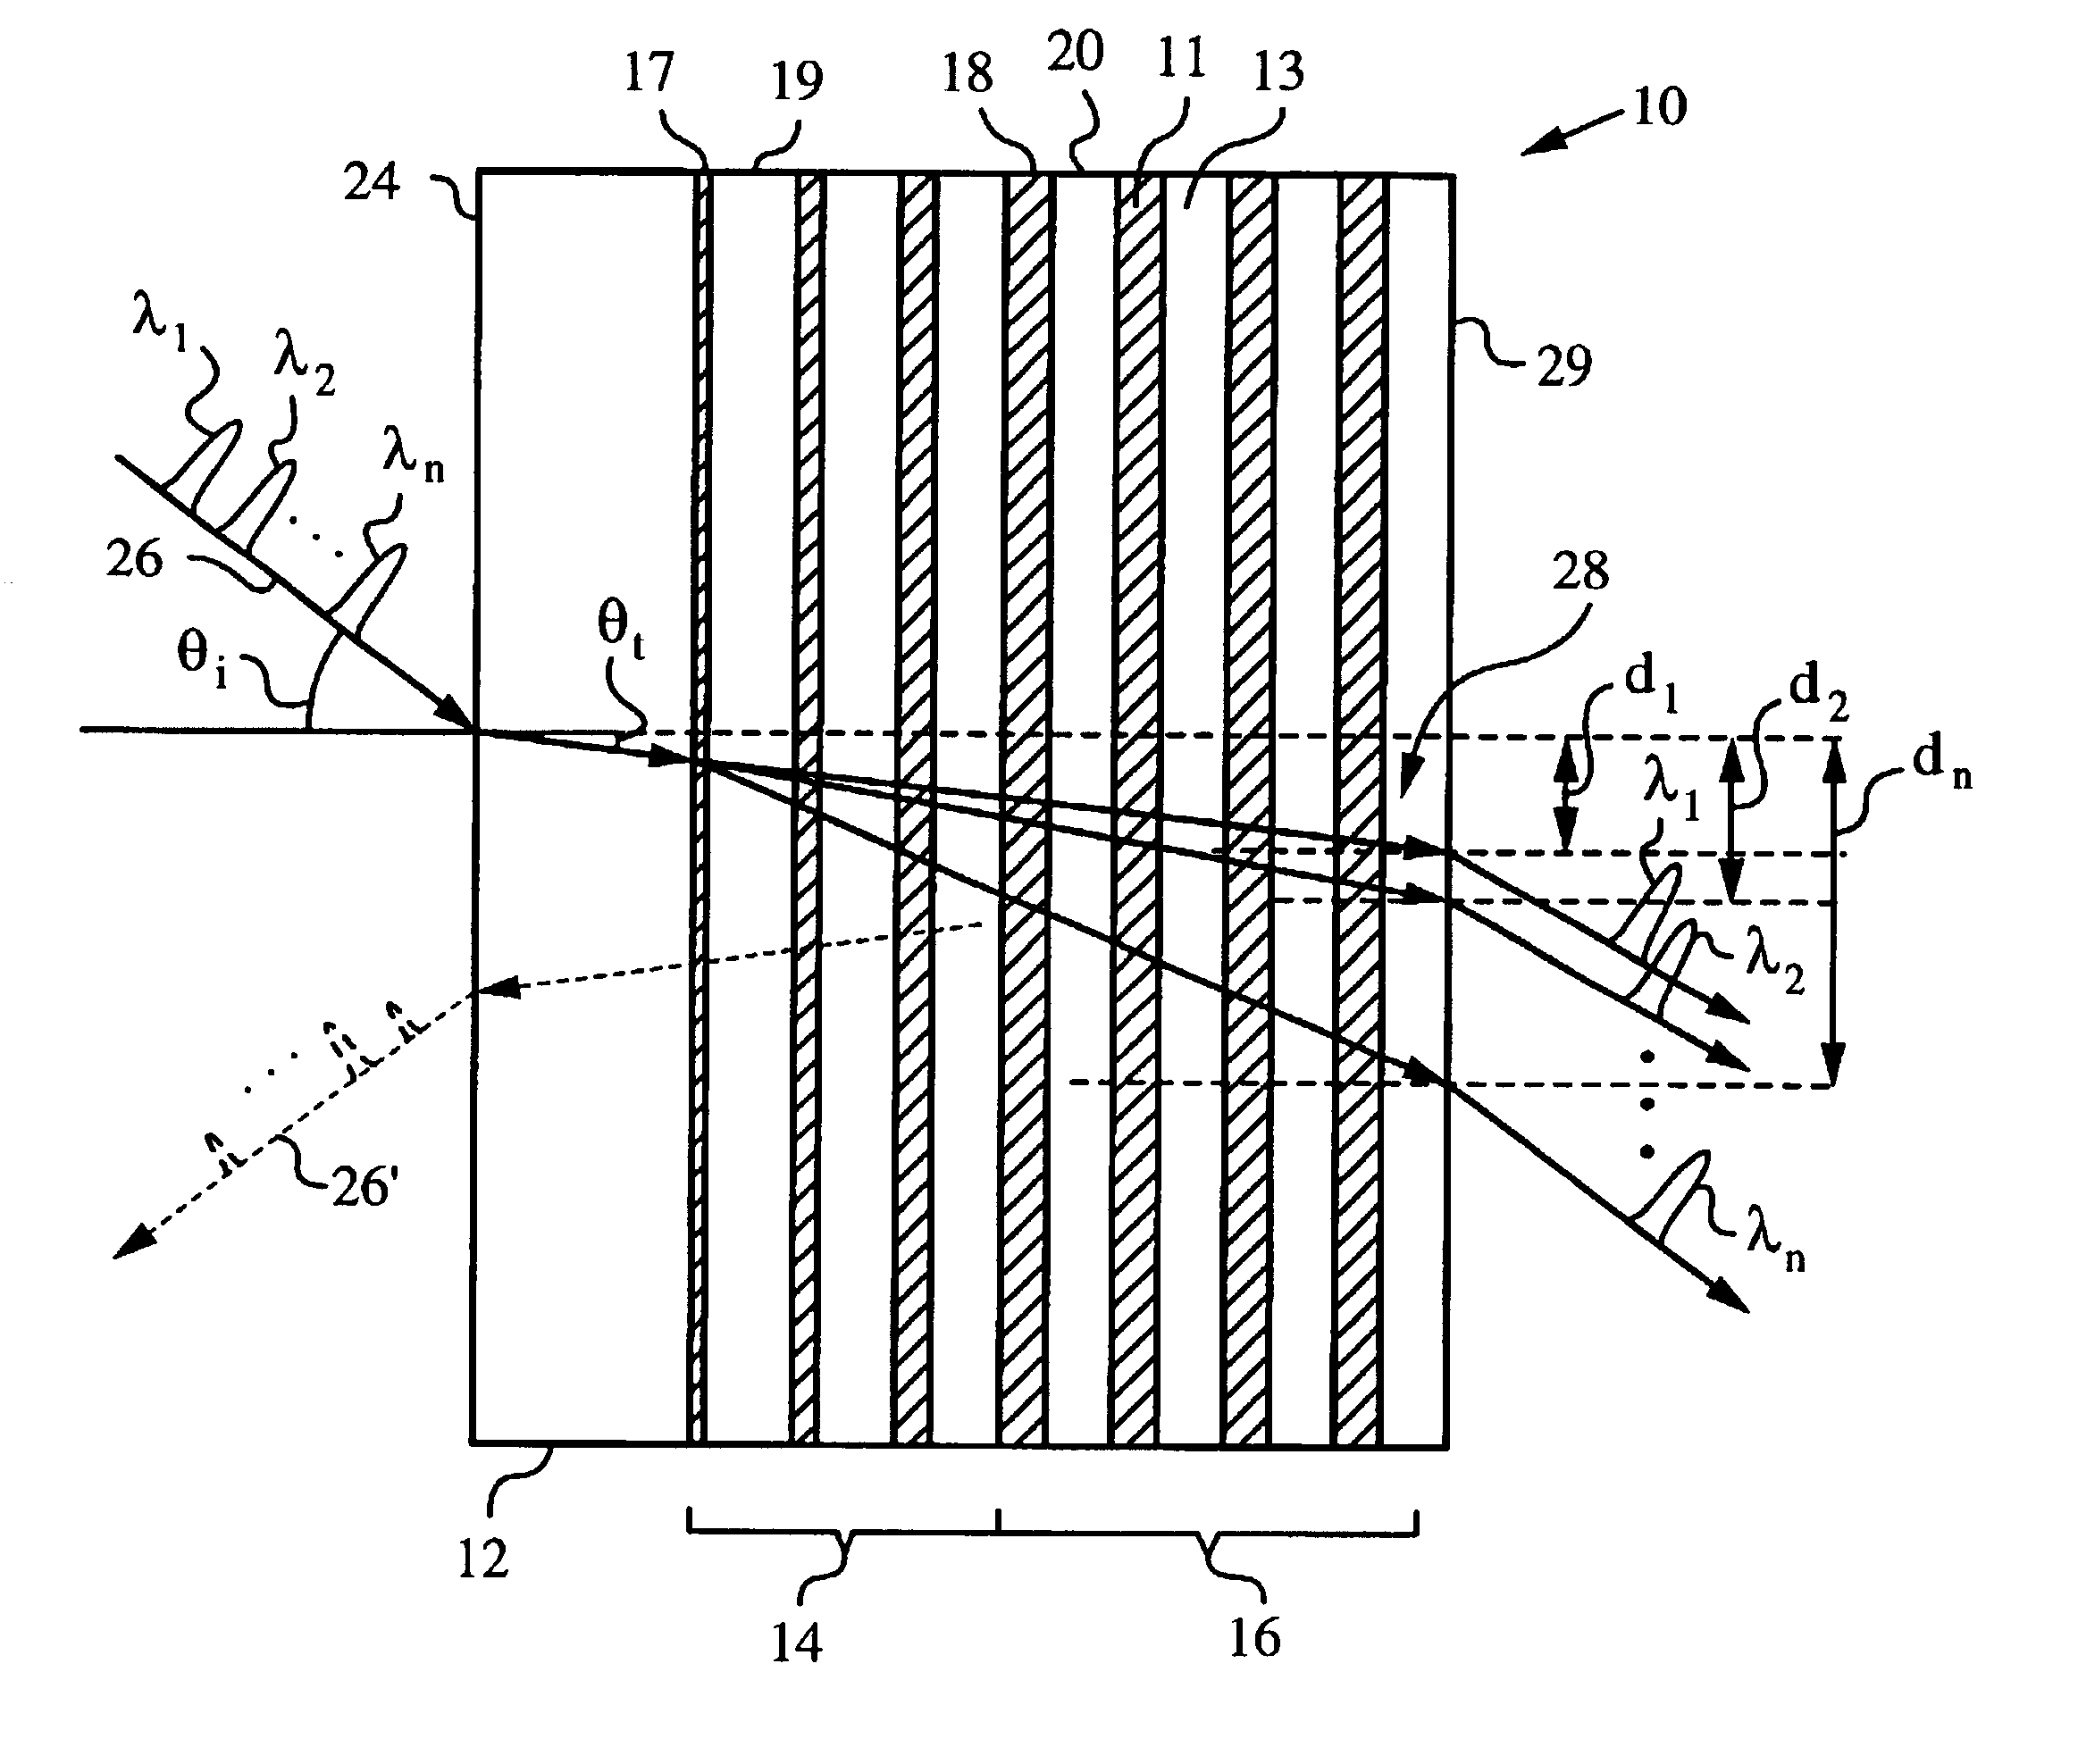 Apparatus and method employing multilayer thin-film stacks for spatially shifting light